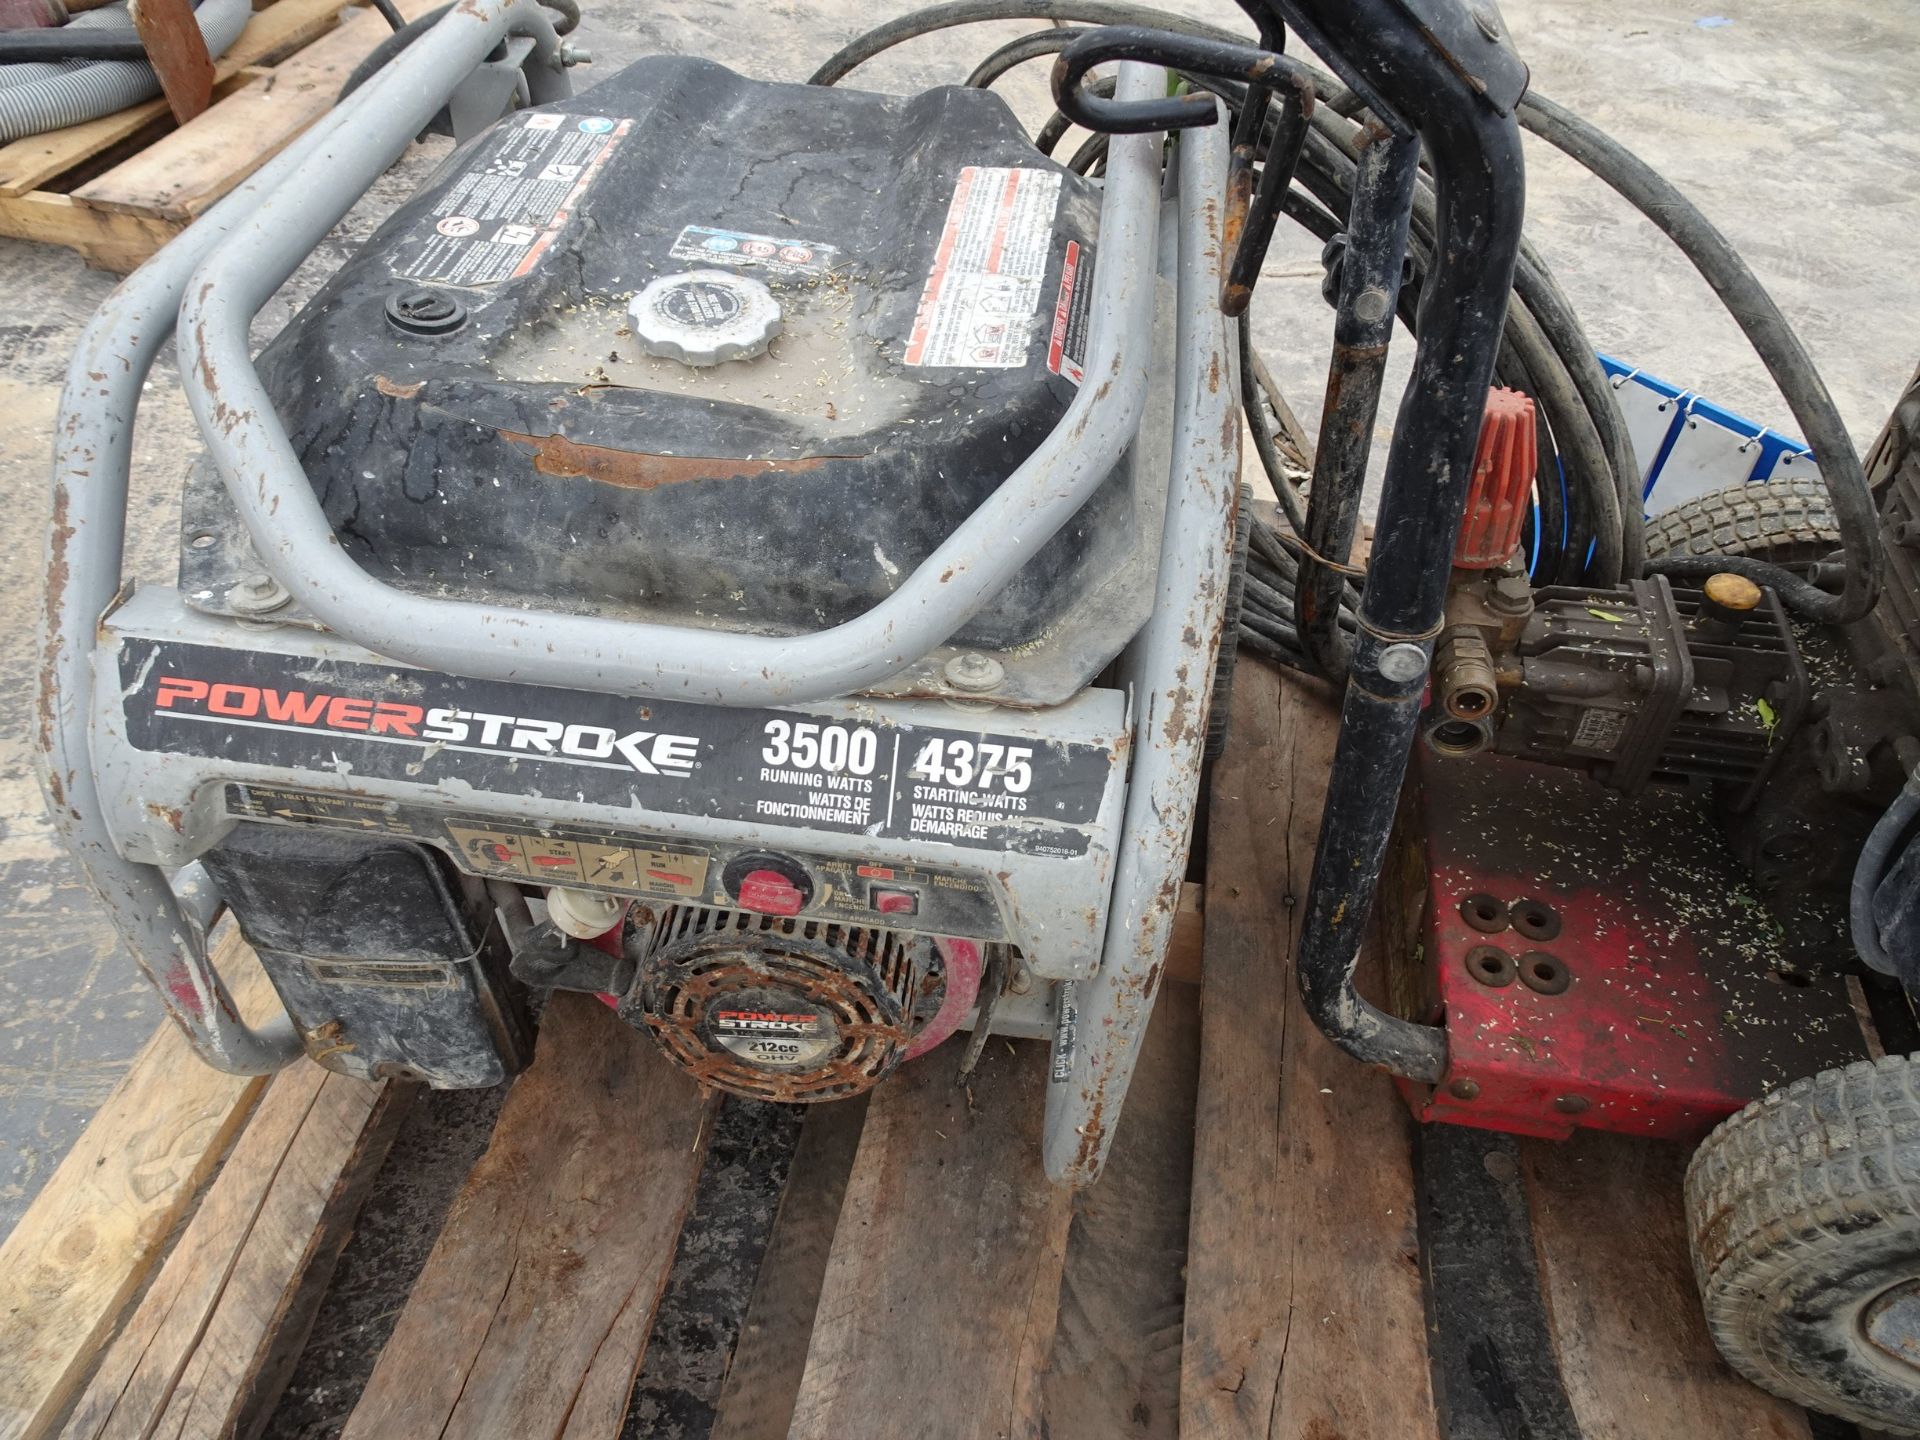 PALLET OF HONDA PRESSURE WASHER & POWERSTROKE 3500 GENSET (NOTE: CONDITIONS UNKNOWN) - Image 3 of 3